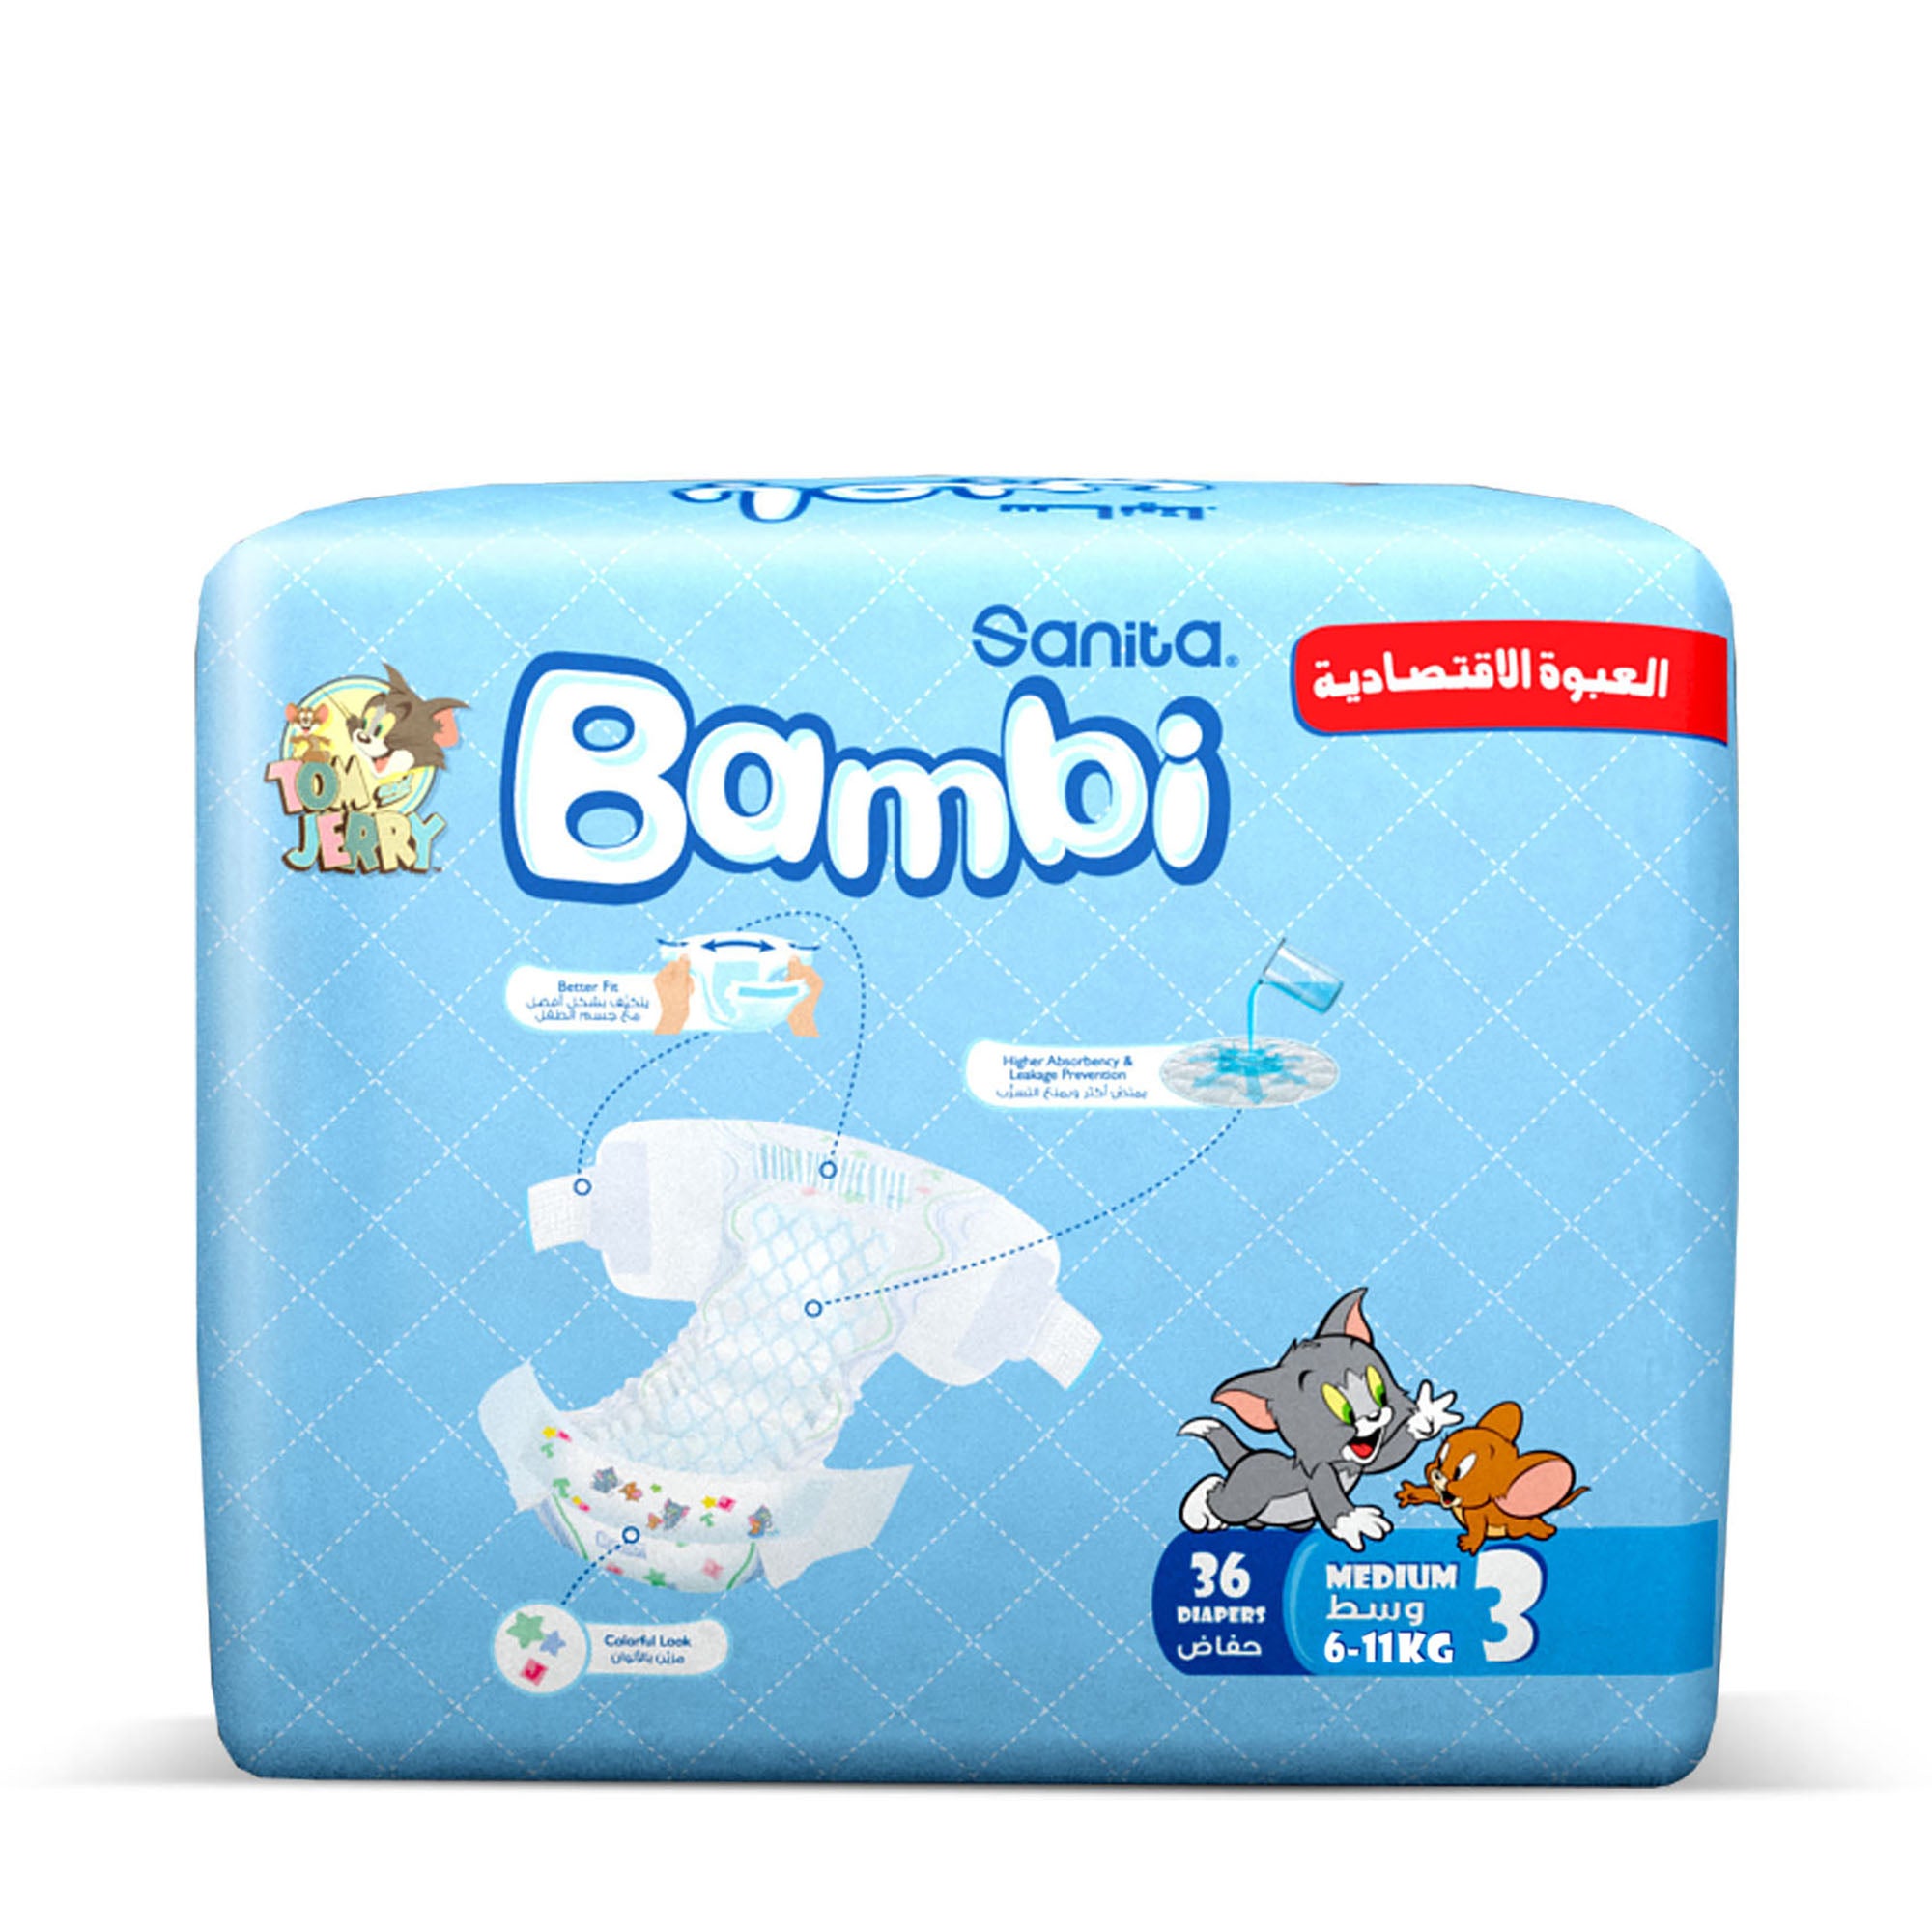 Bambi Baby Diapers Value Pack Size 3, Medium, 5-9 kg - 36's